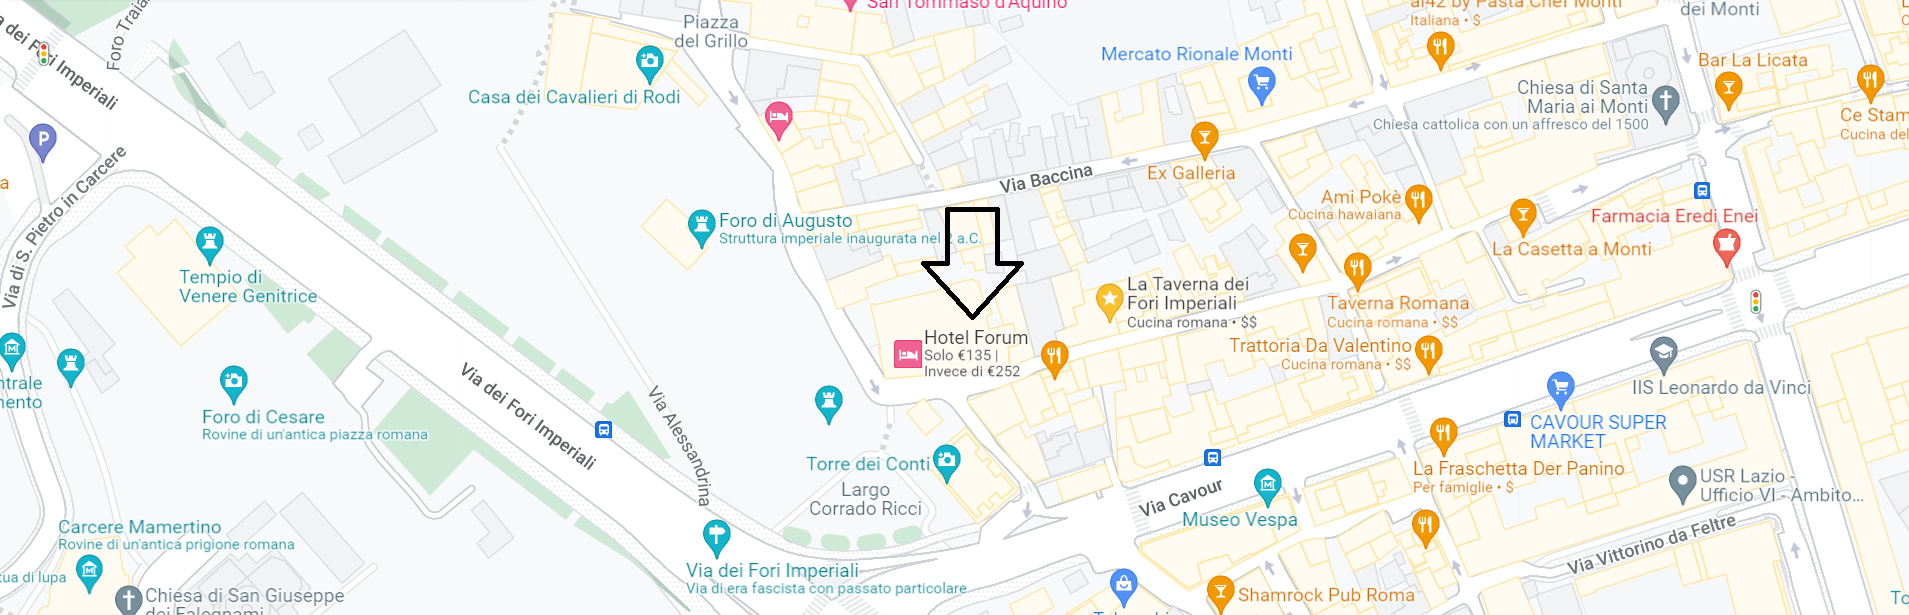 Map to Hotel Forum